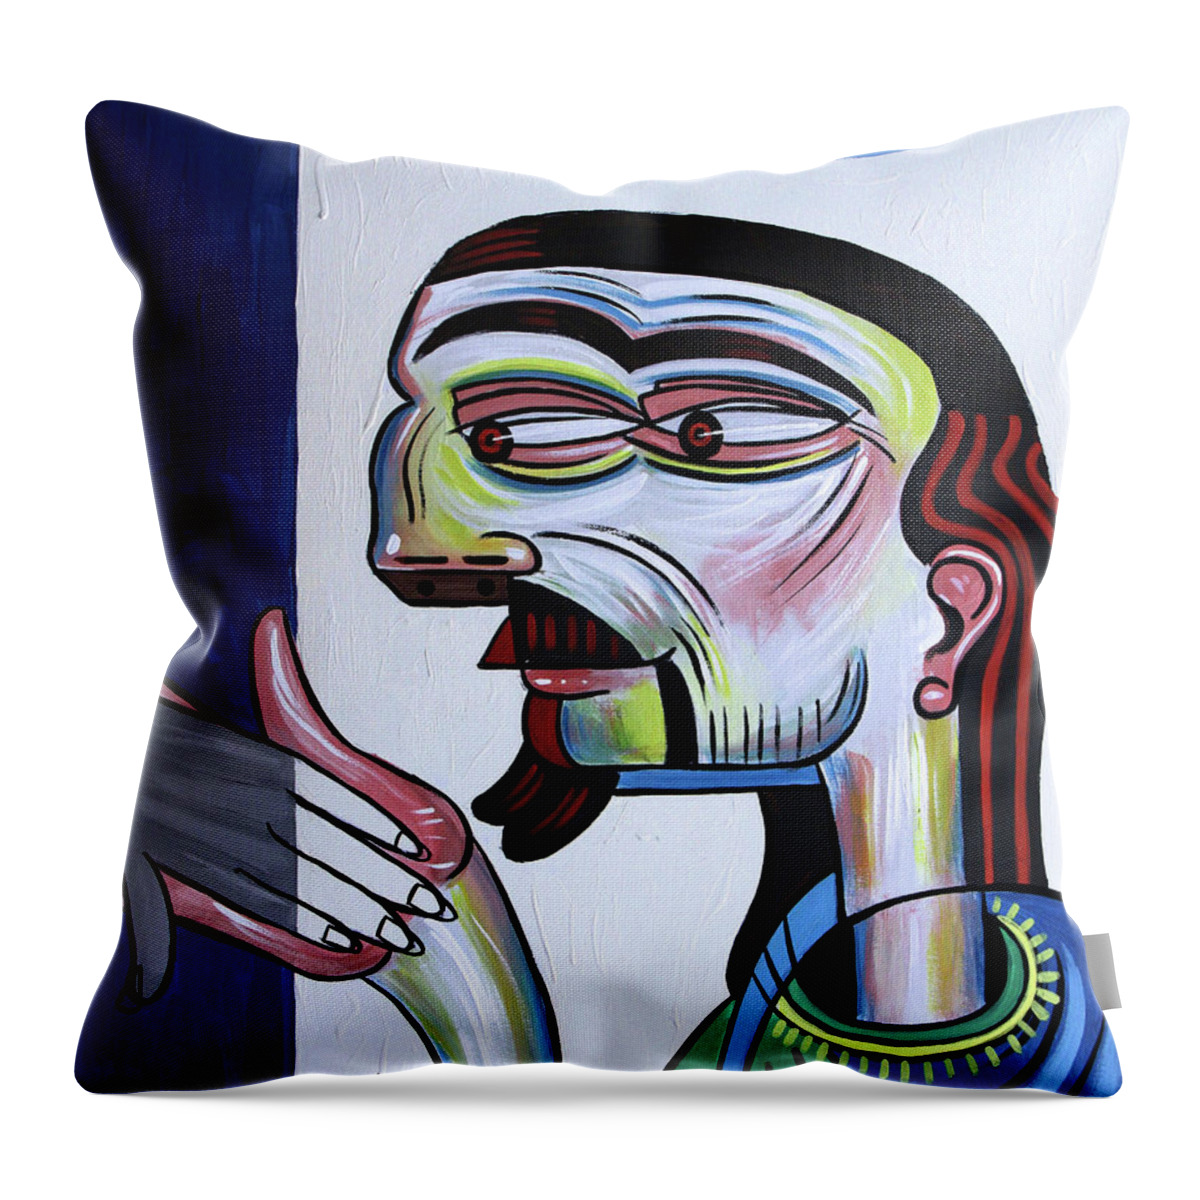 Cubism Throw Pillow featuring the painting Take My Hand by Anthony Falbo